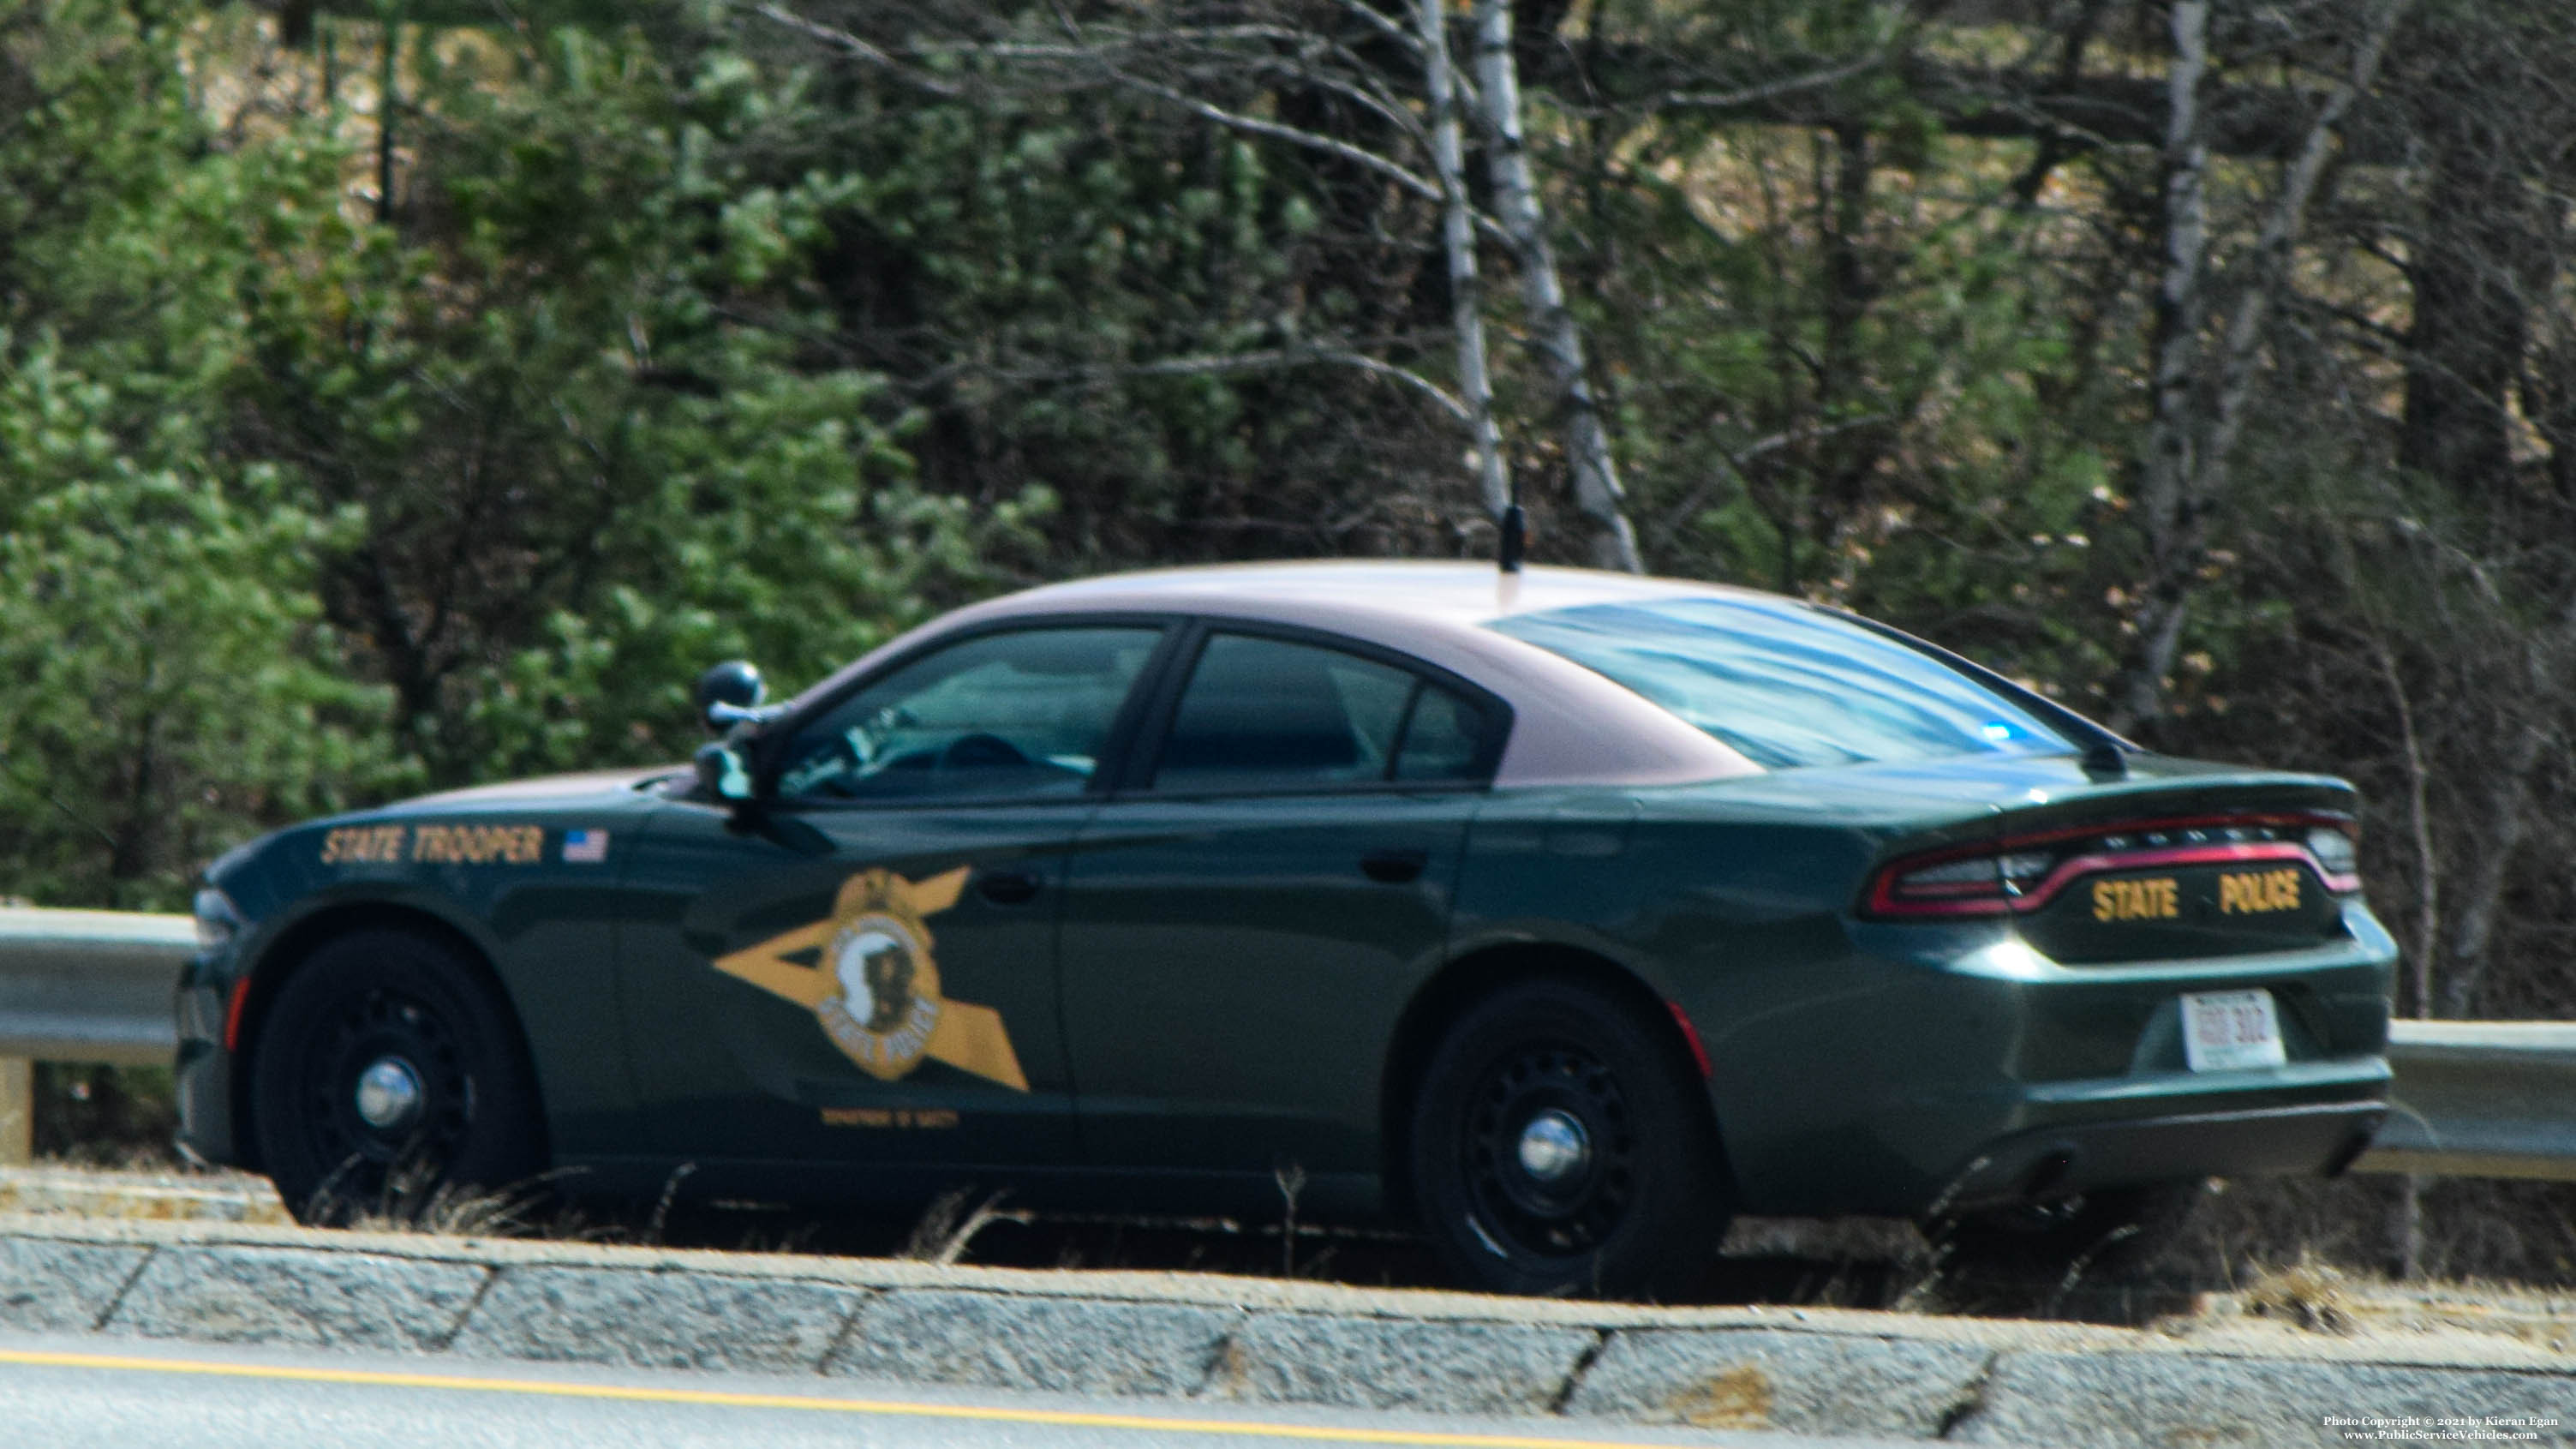 A photo  of New Hampshire State Police
            Cruiser 312, a 2017-2019 Dodge Charger             taken by Kieran Egan